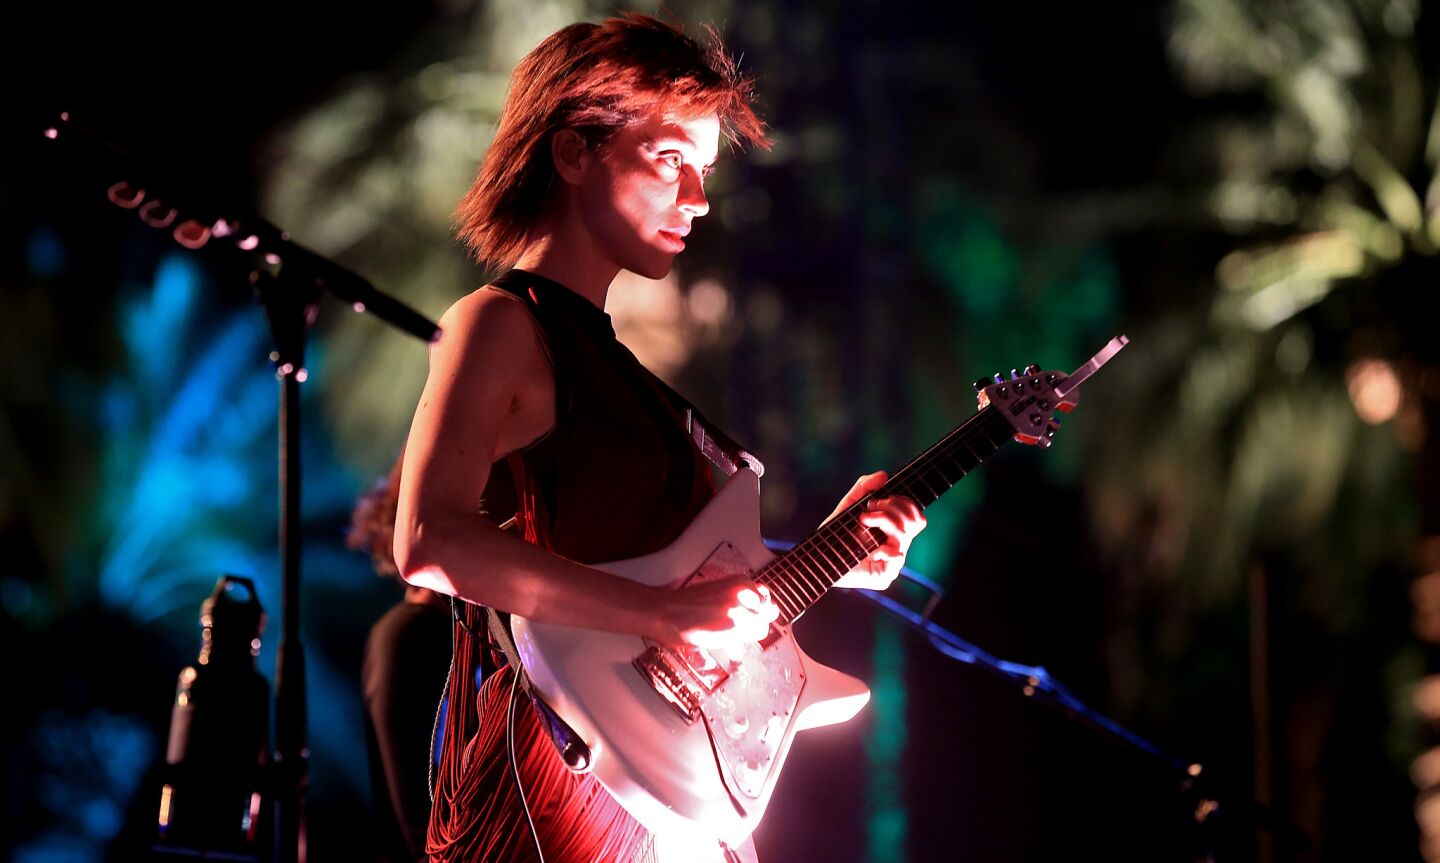 St. Vincent performs at the Coachella Valley Music and Arts Festival on April 12.